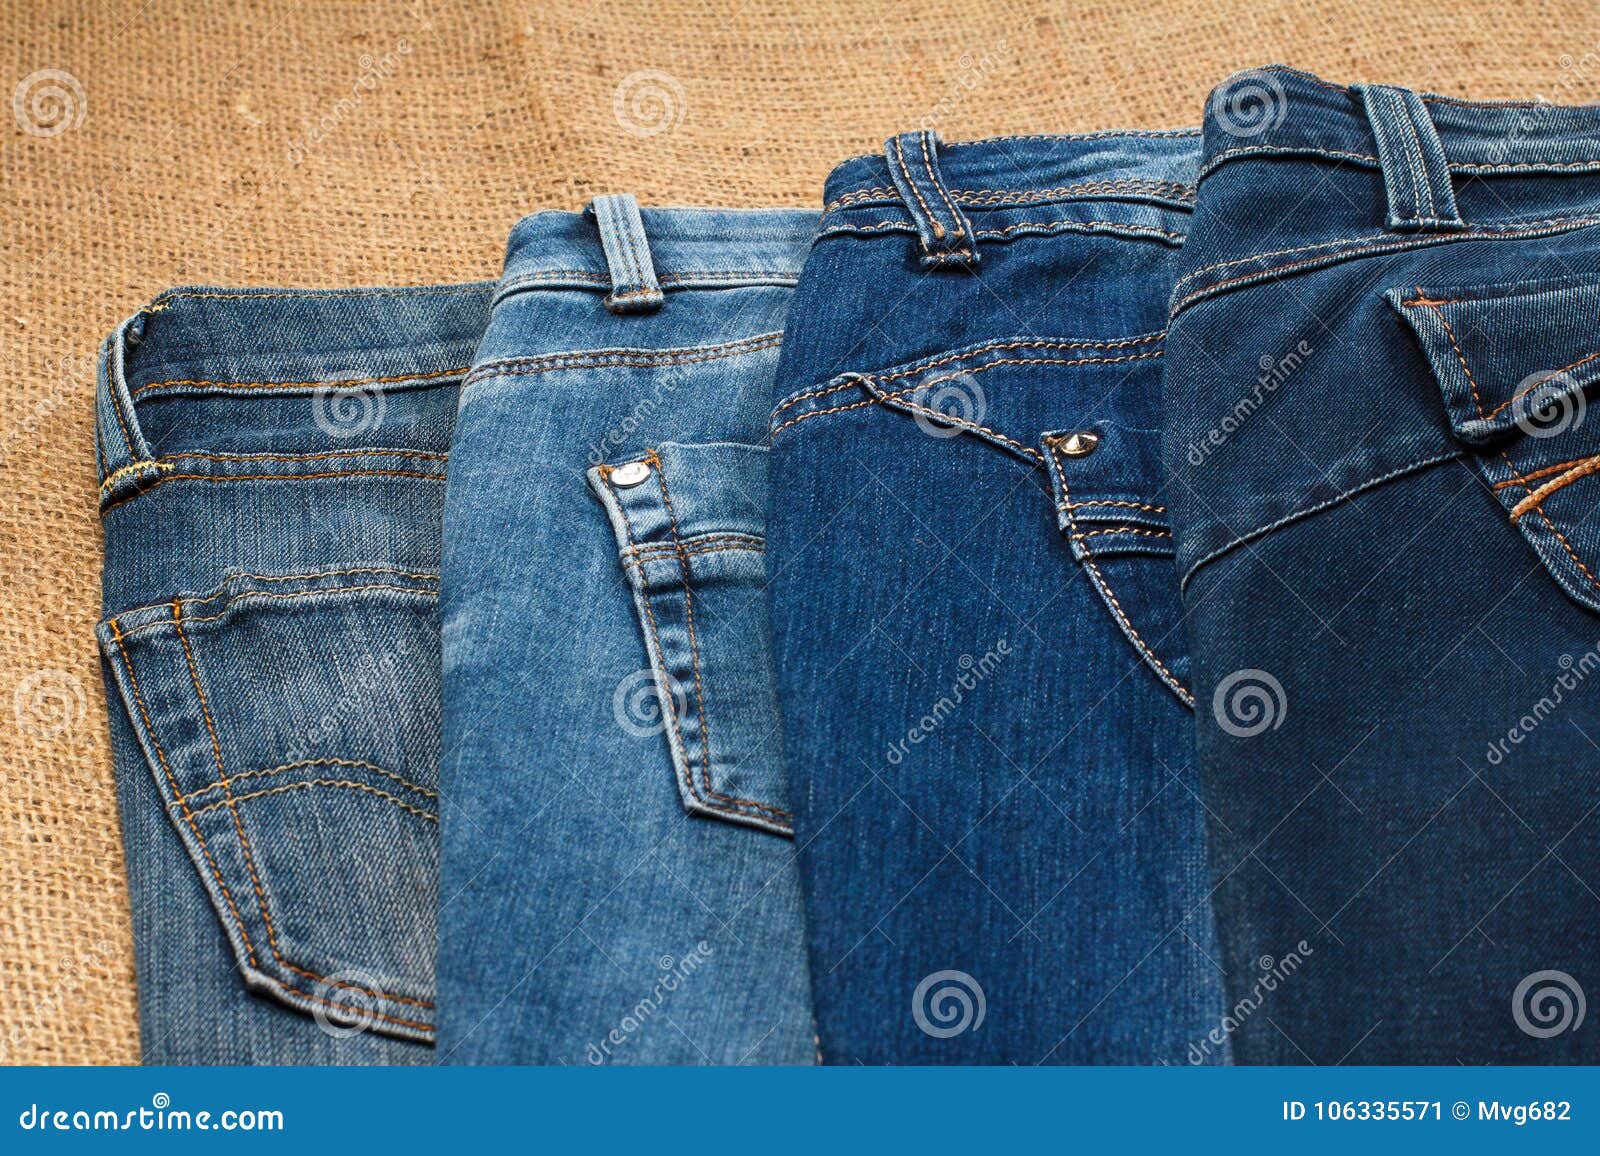 Two Pair of Jeans Lying on Sackcloth Stock Image - Image of style ...